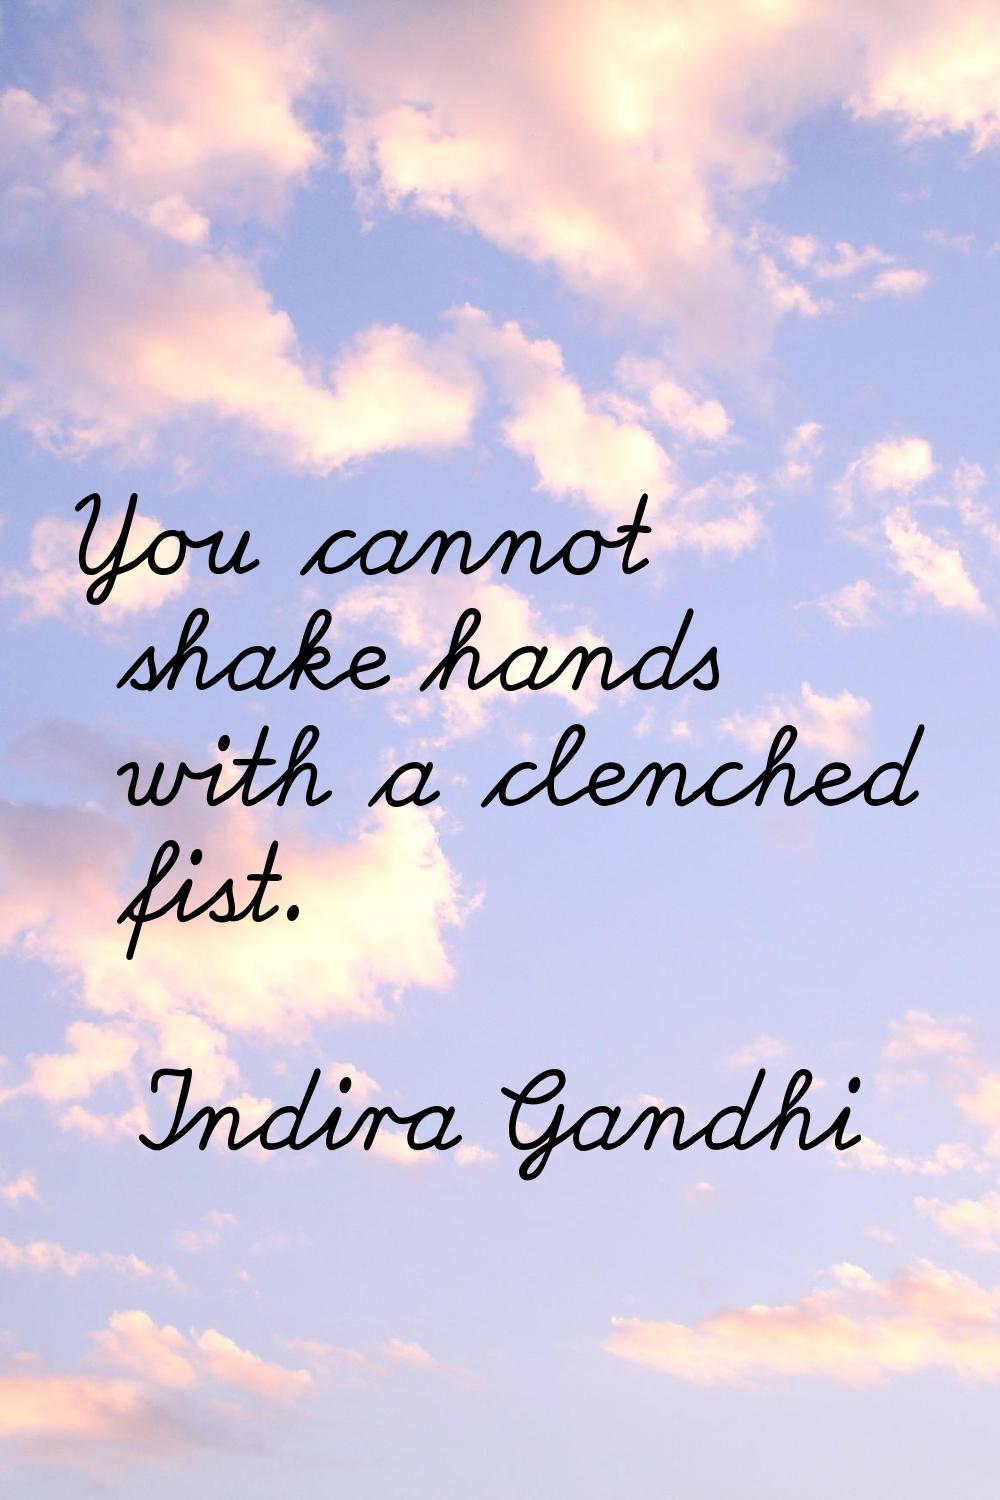 You cannot shake hands with a clenched fist.